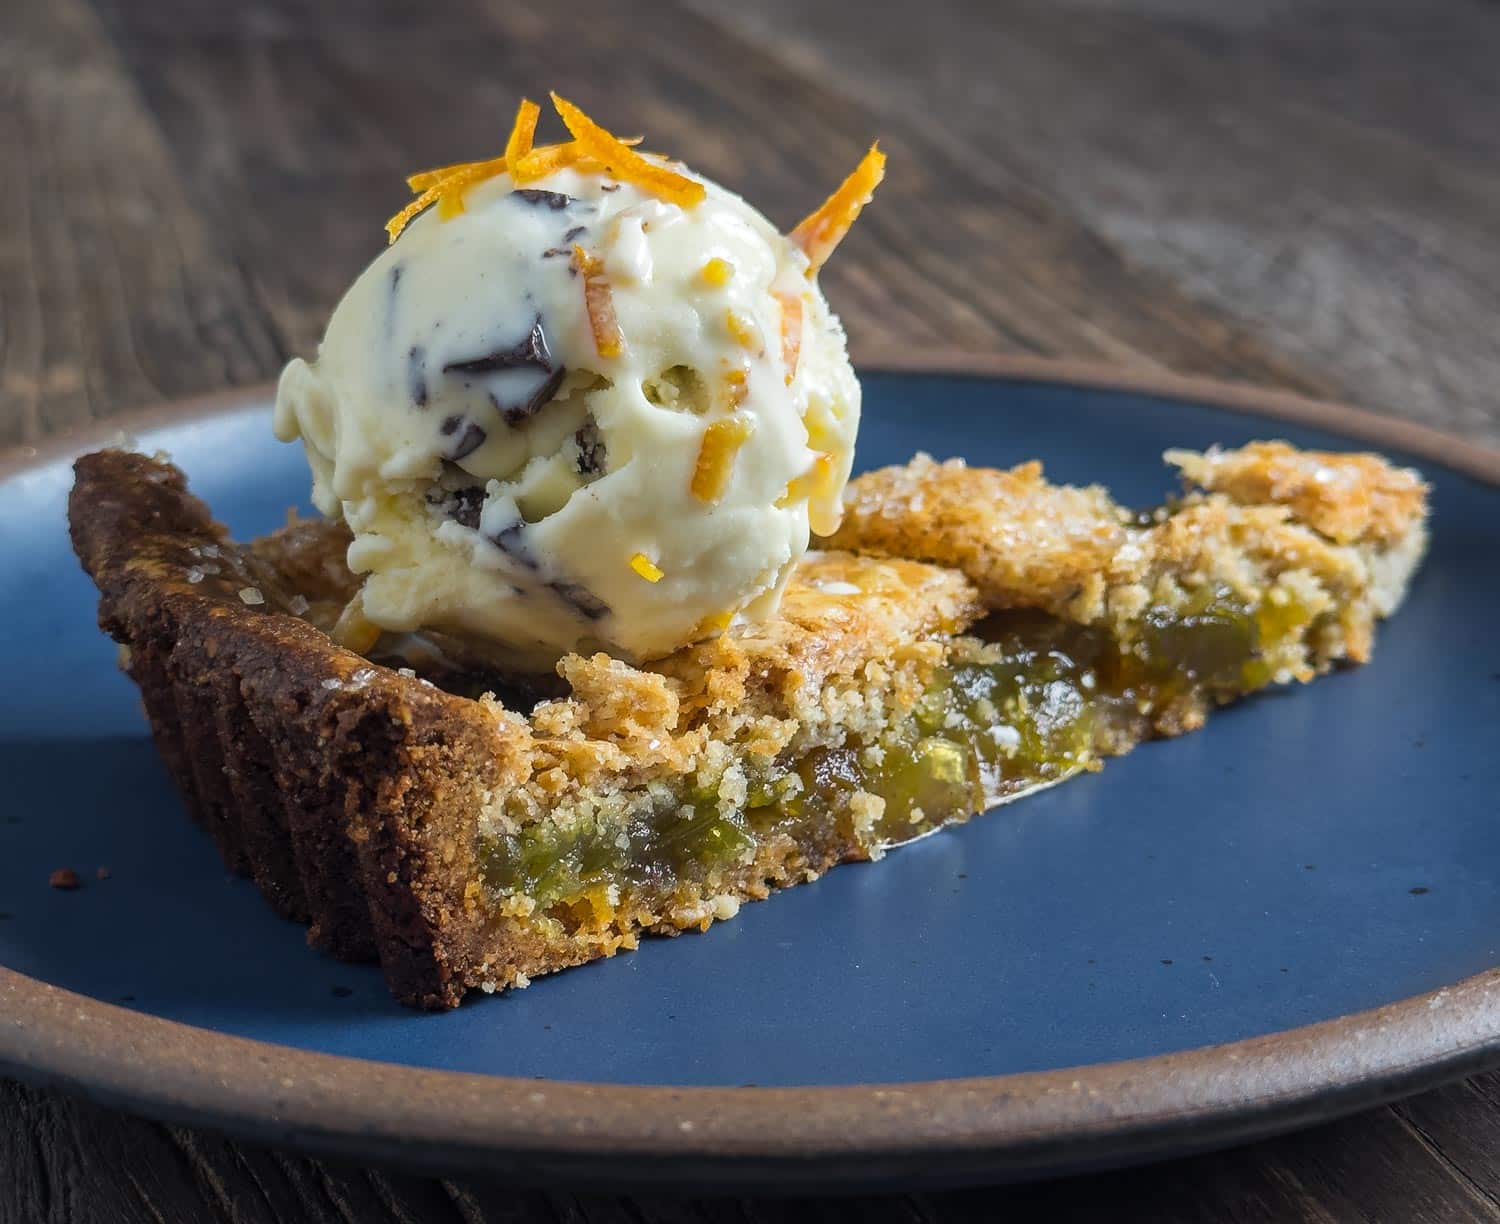 Slice of Green Tomato and Almond Tart with Crème Fraîche, Orange, and Chocolate Ice Cream